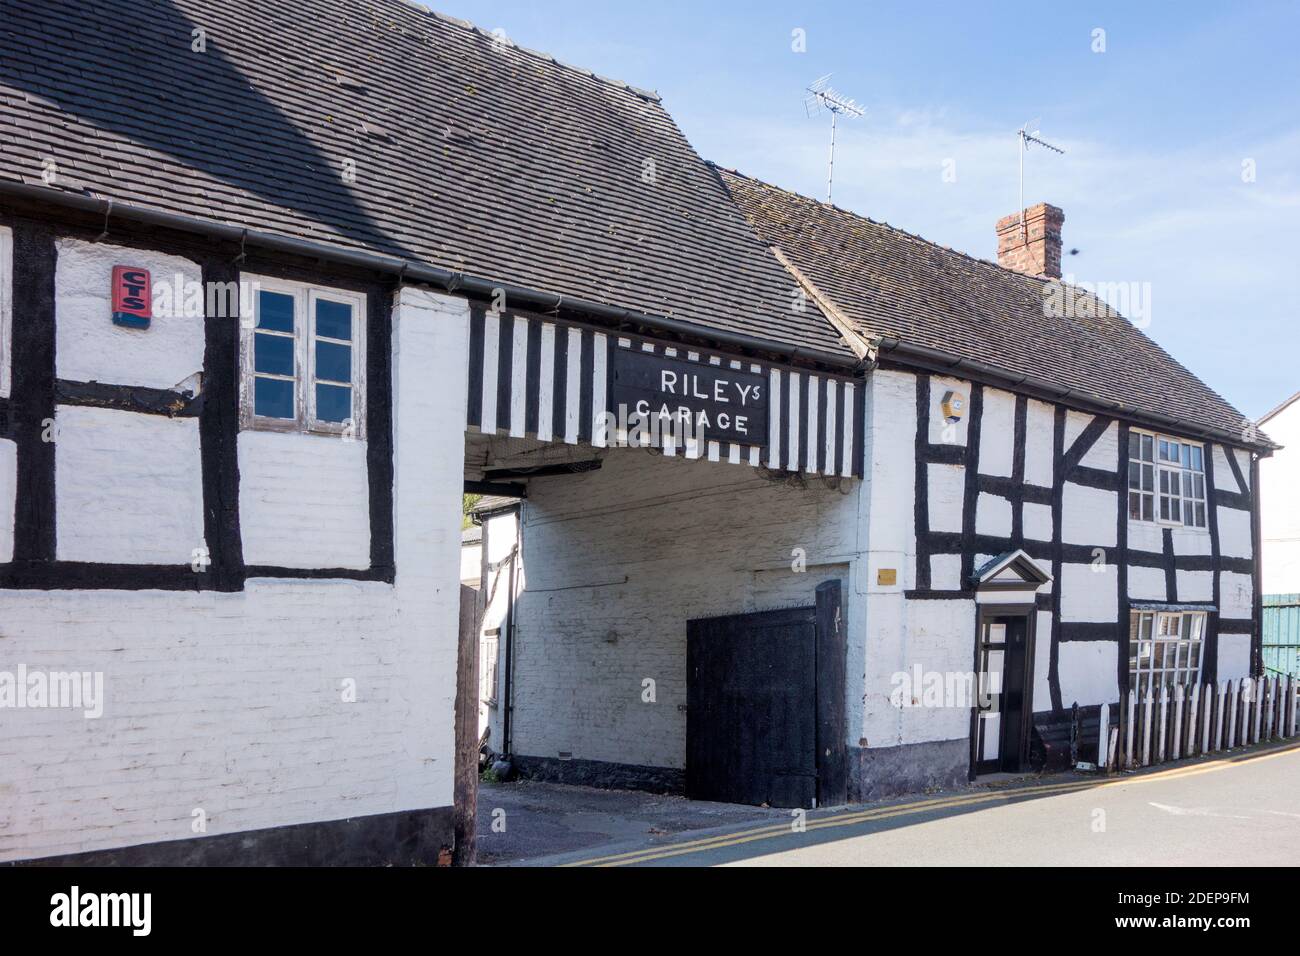 Riley's garage Nantwich Cheshire situated in black and white half timbered  building Stock Photo